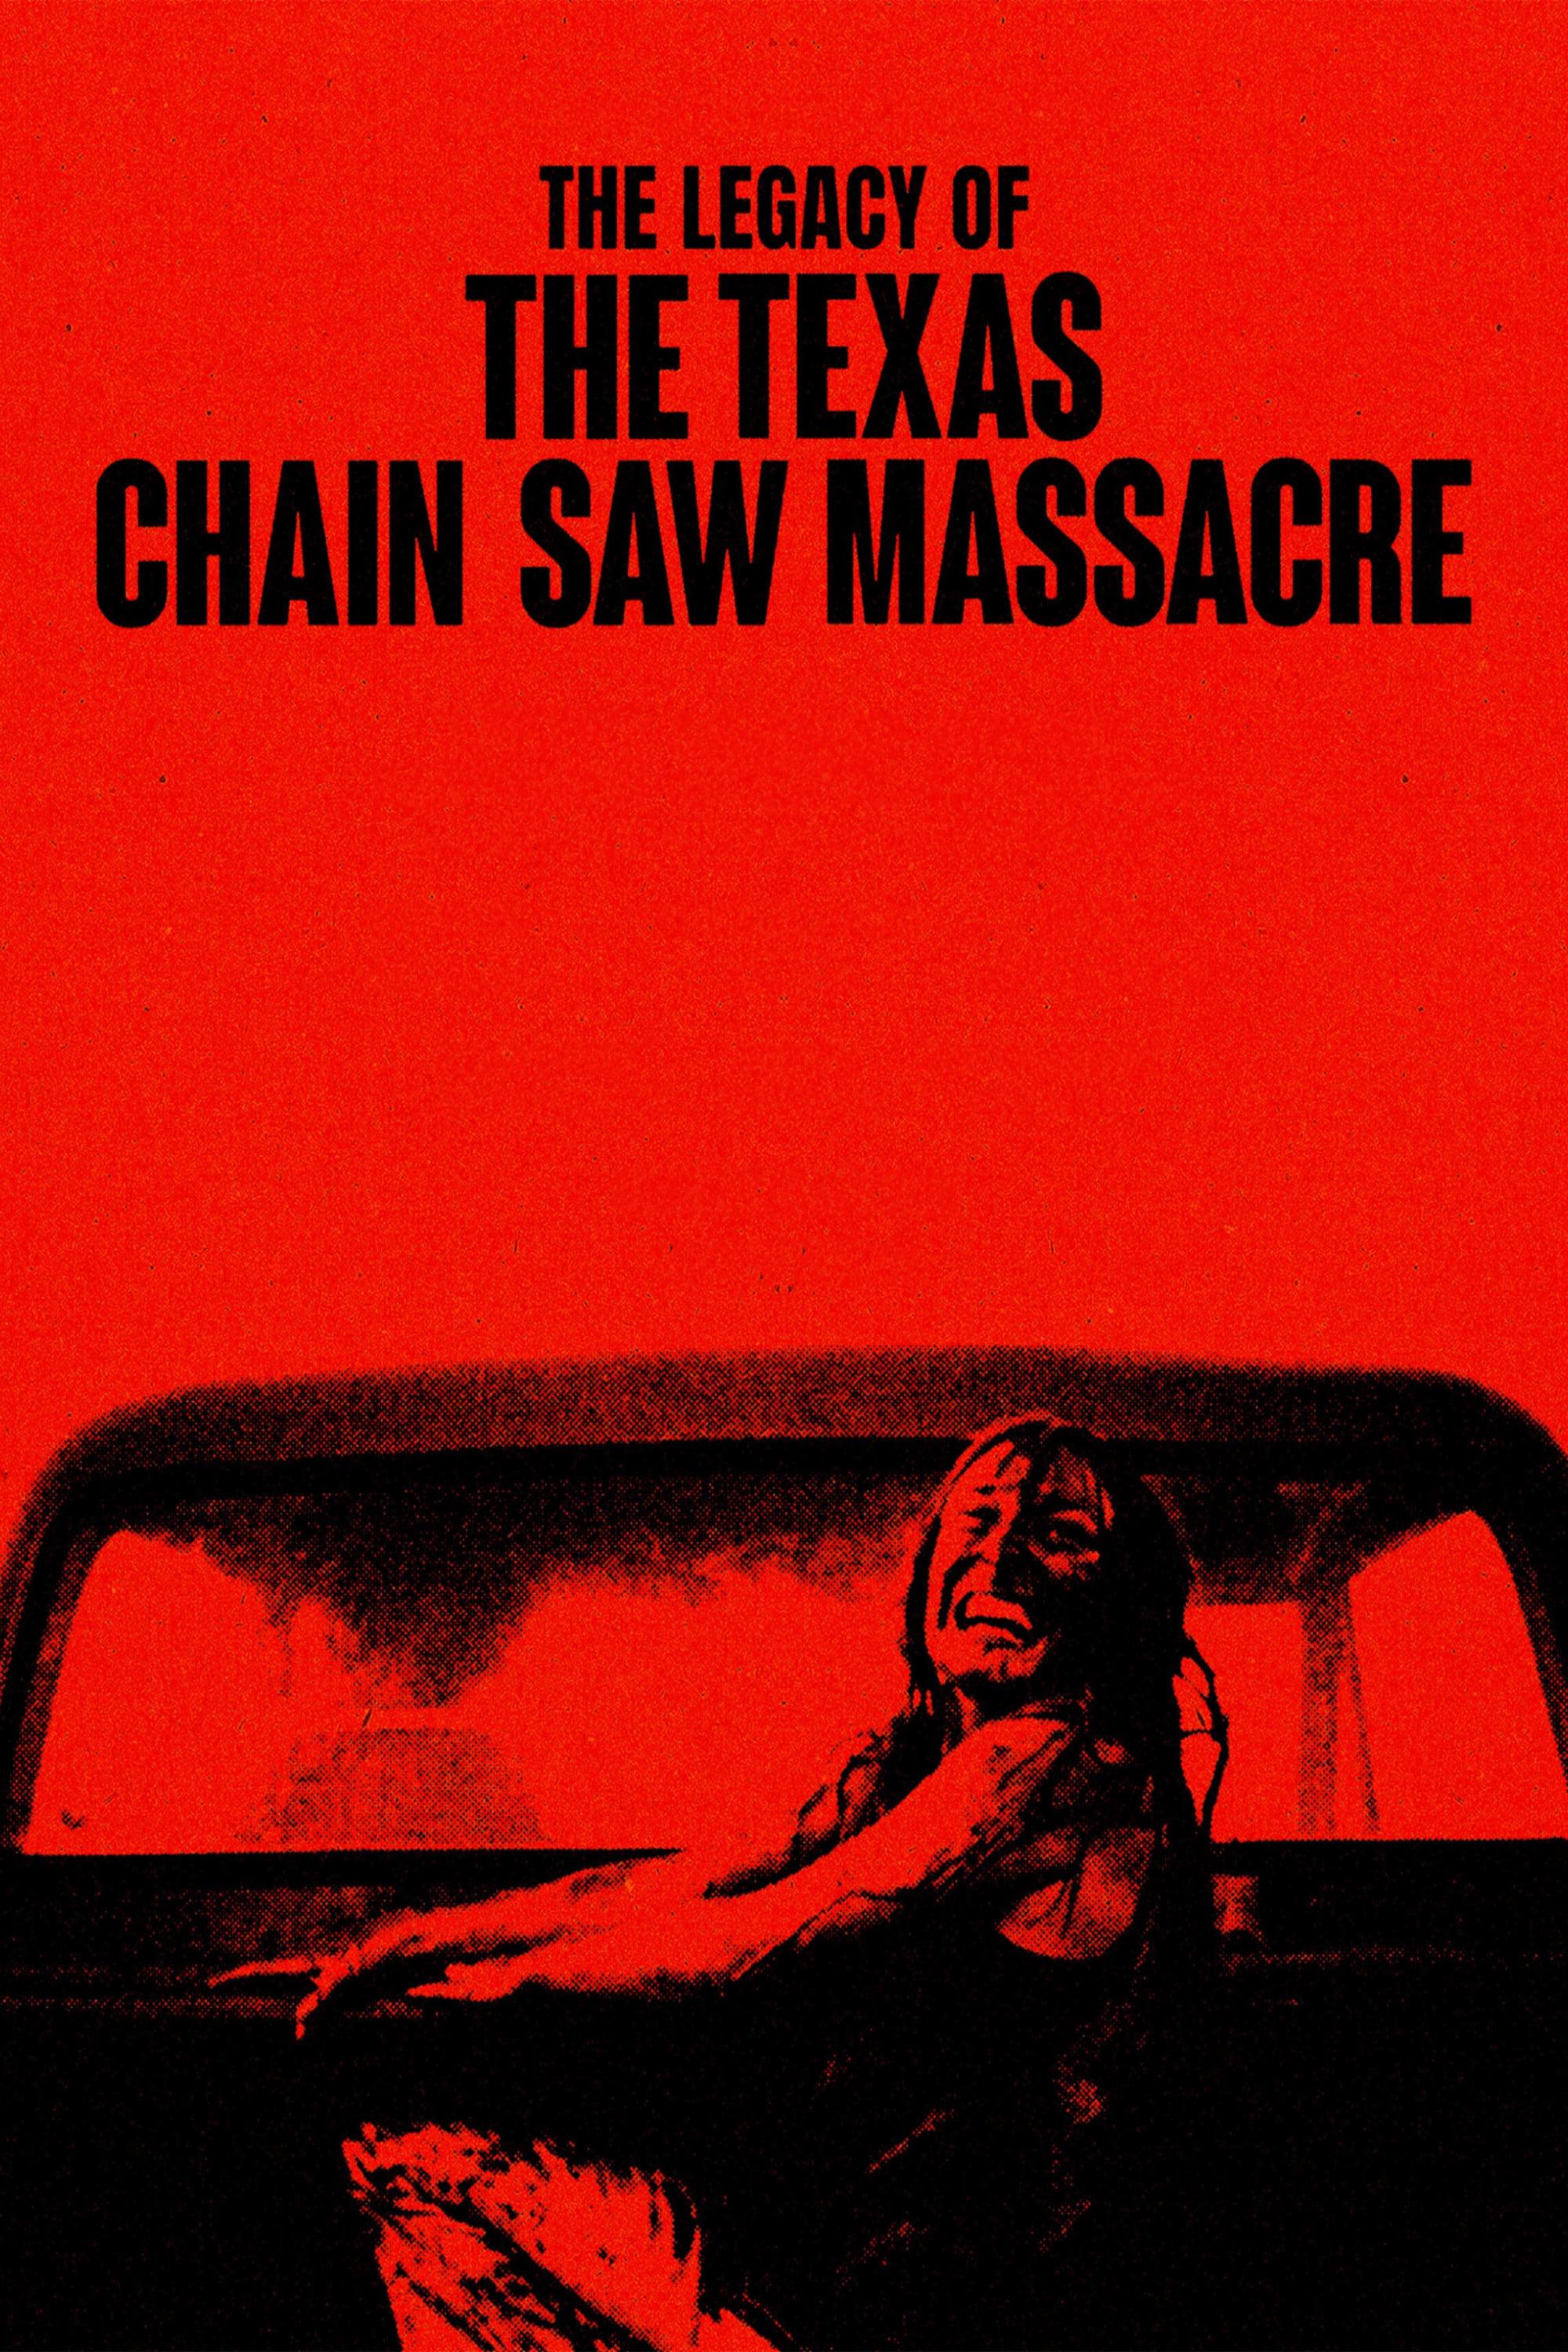 The Legacy of The Texas Chain Saw Massacre poster